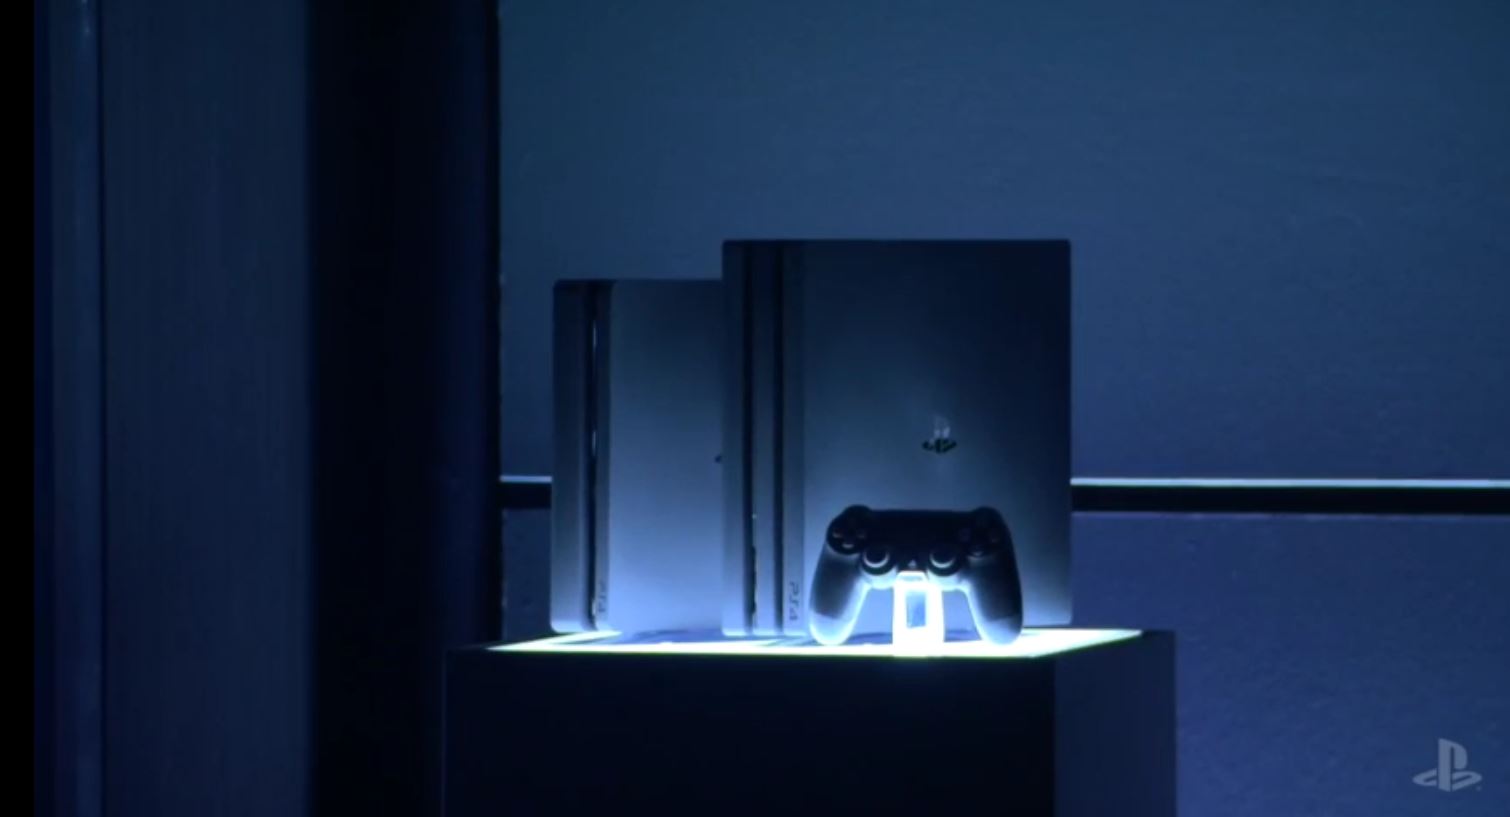 PlayStation 4 Pro Review: Does It Improve The PS VR Experience?